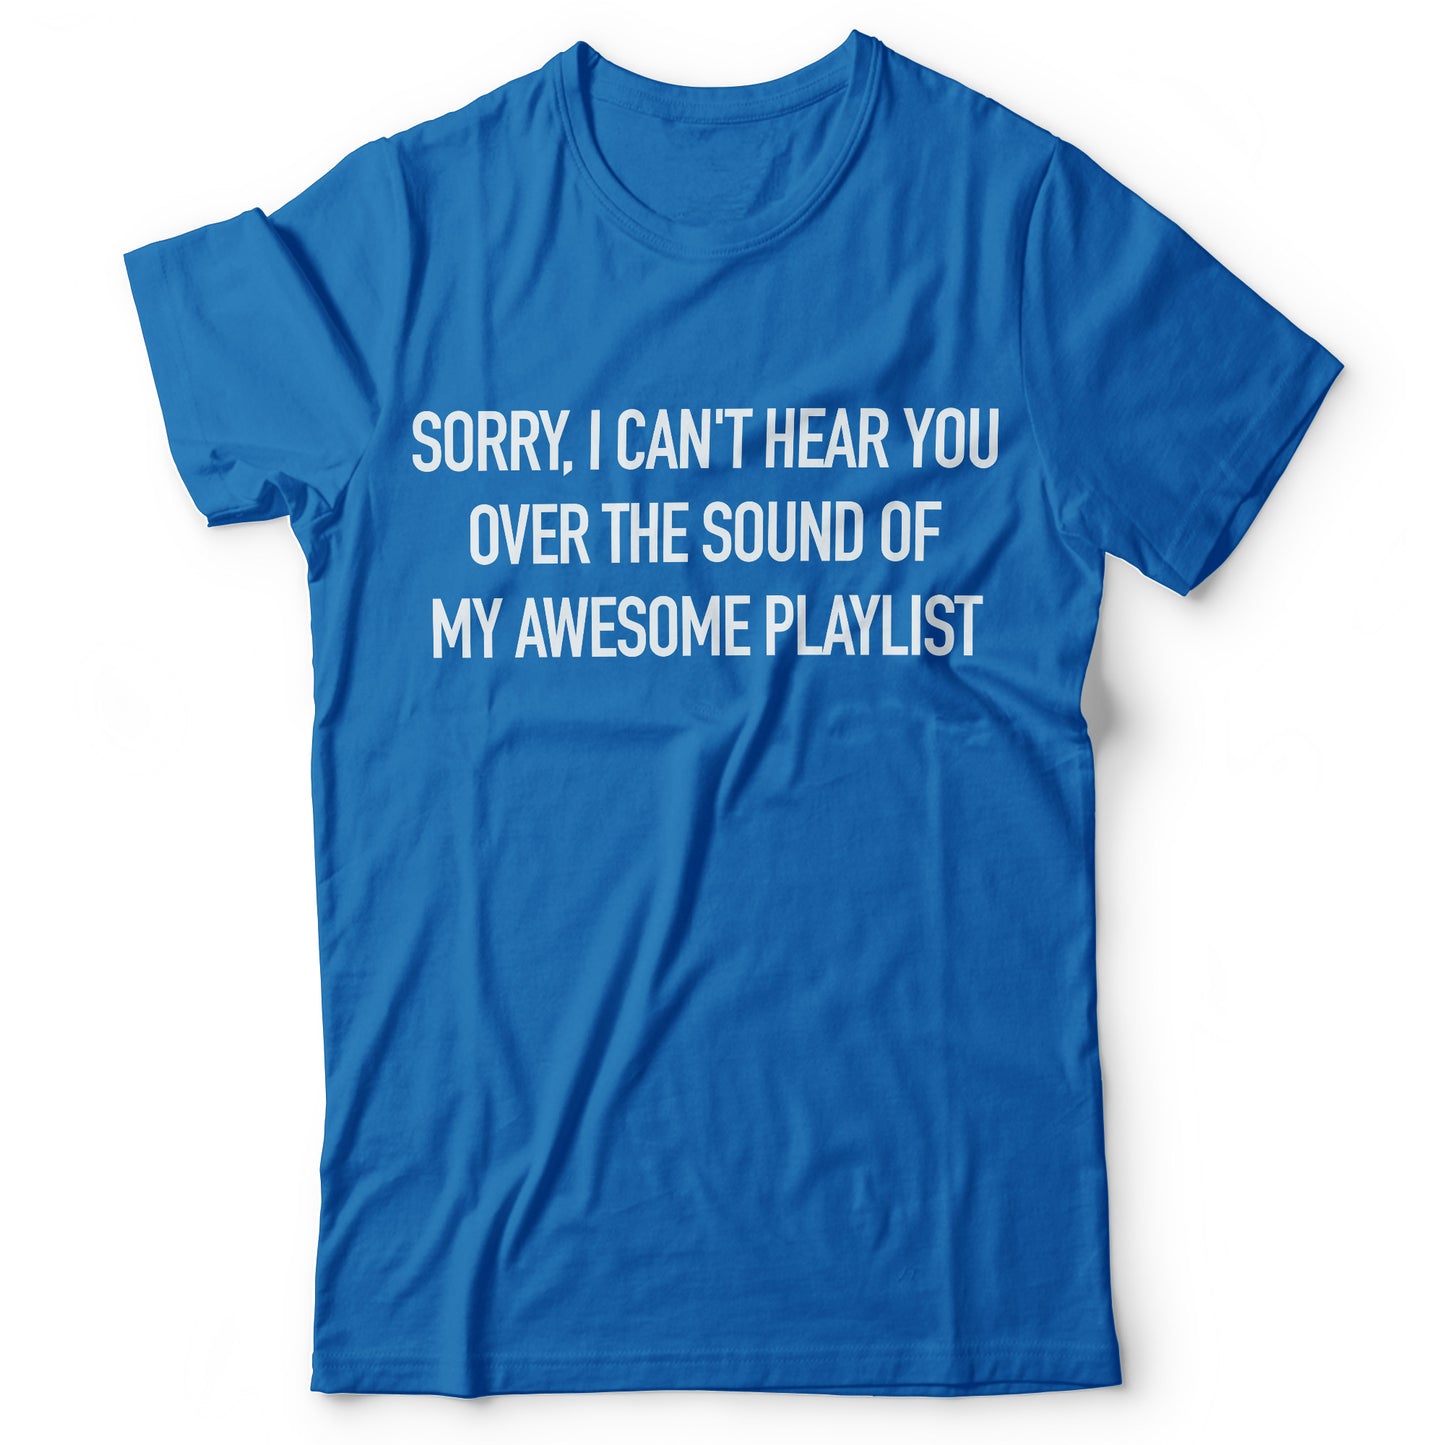 Sorry, I Can't Hear You - T-shirt